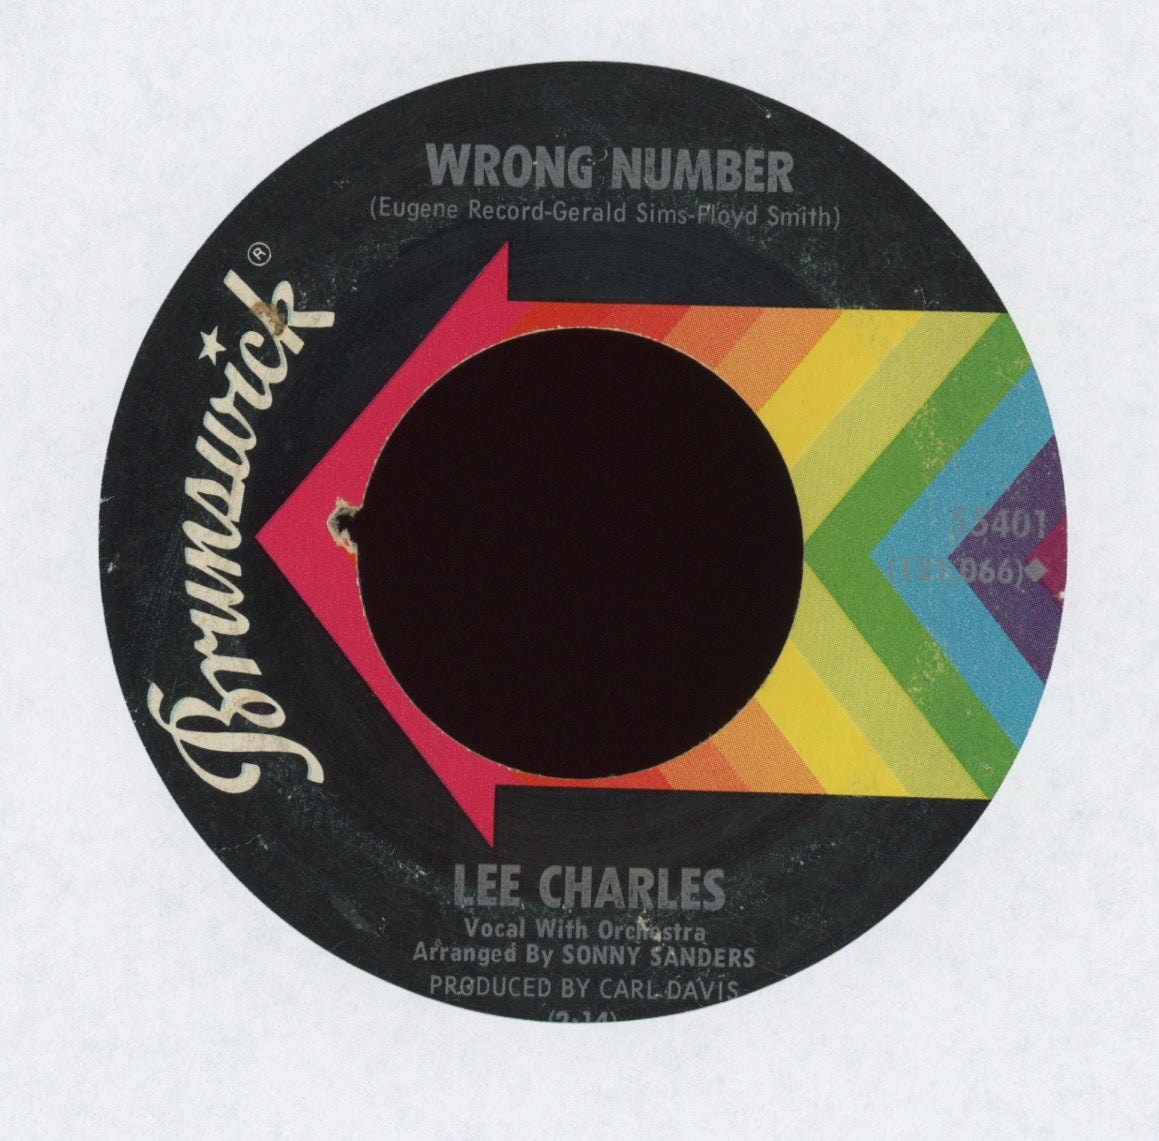 Lee Charles - Wrong Number on Brunswick